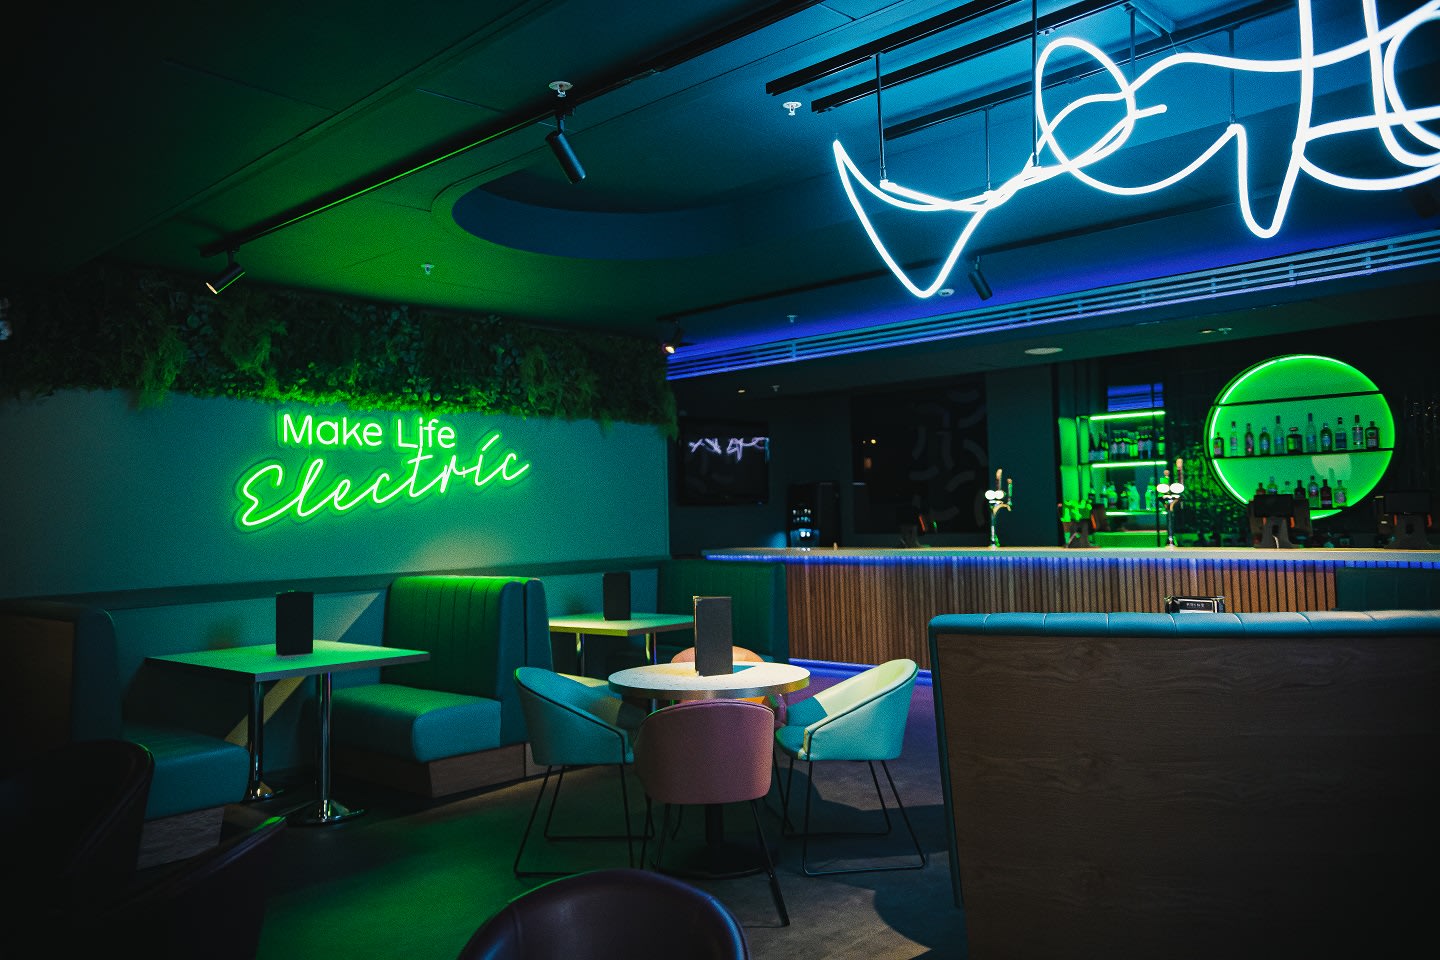 Electric Lounge, AO Arena Manchester 